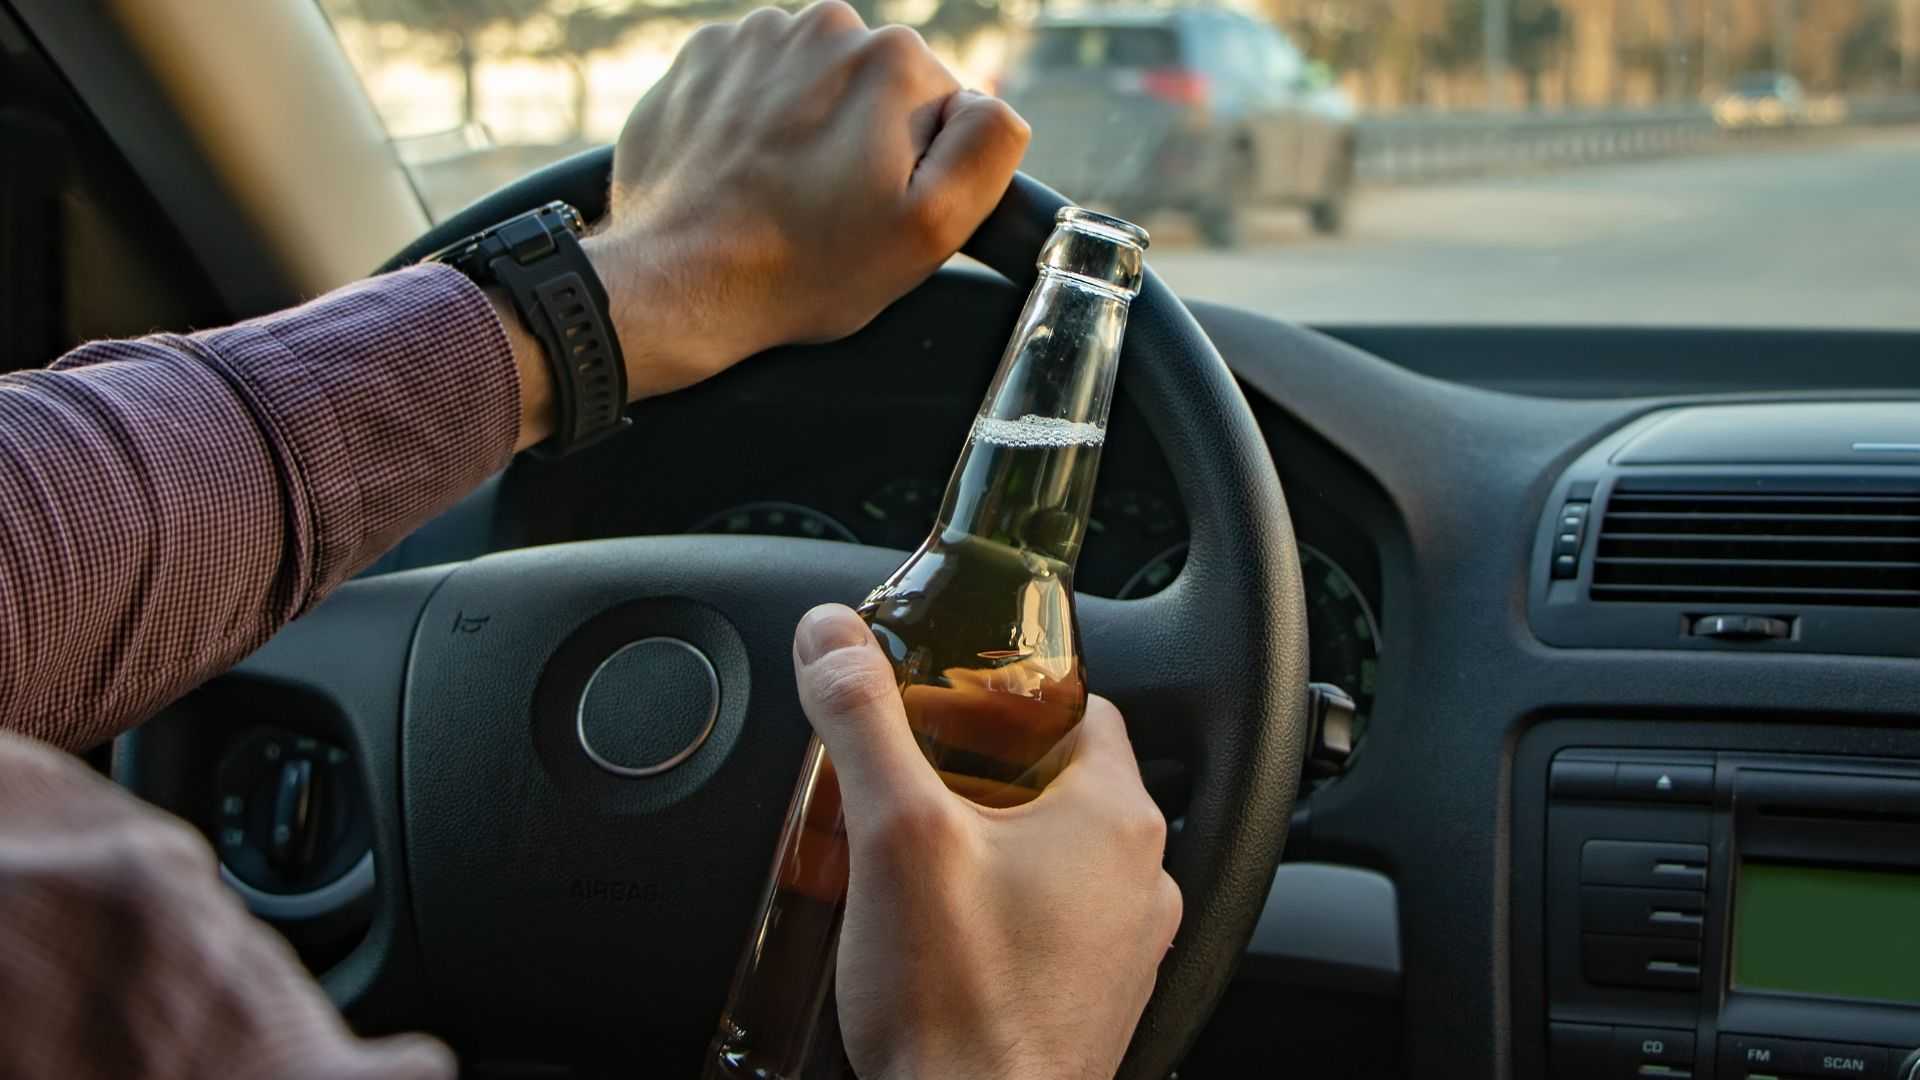 ‘Don’t drink and drive’ LTO reminds motorists amid holiday parties